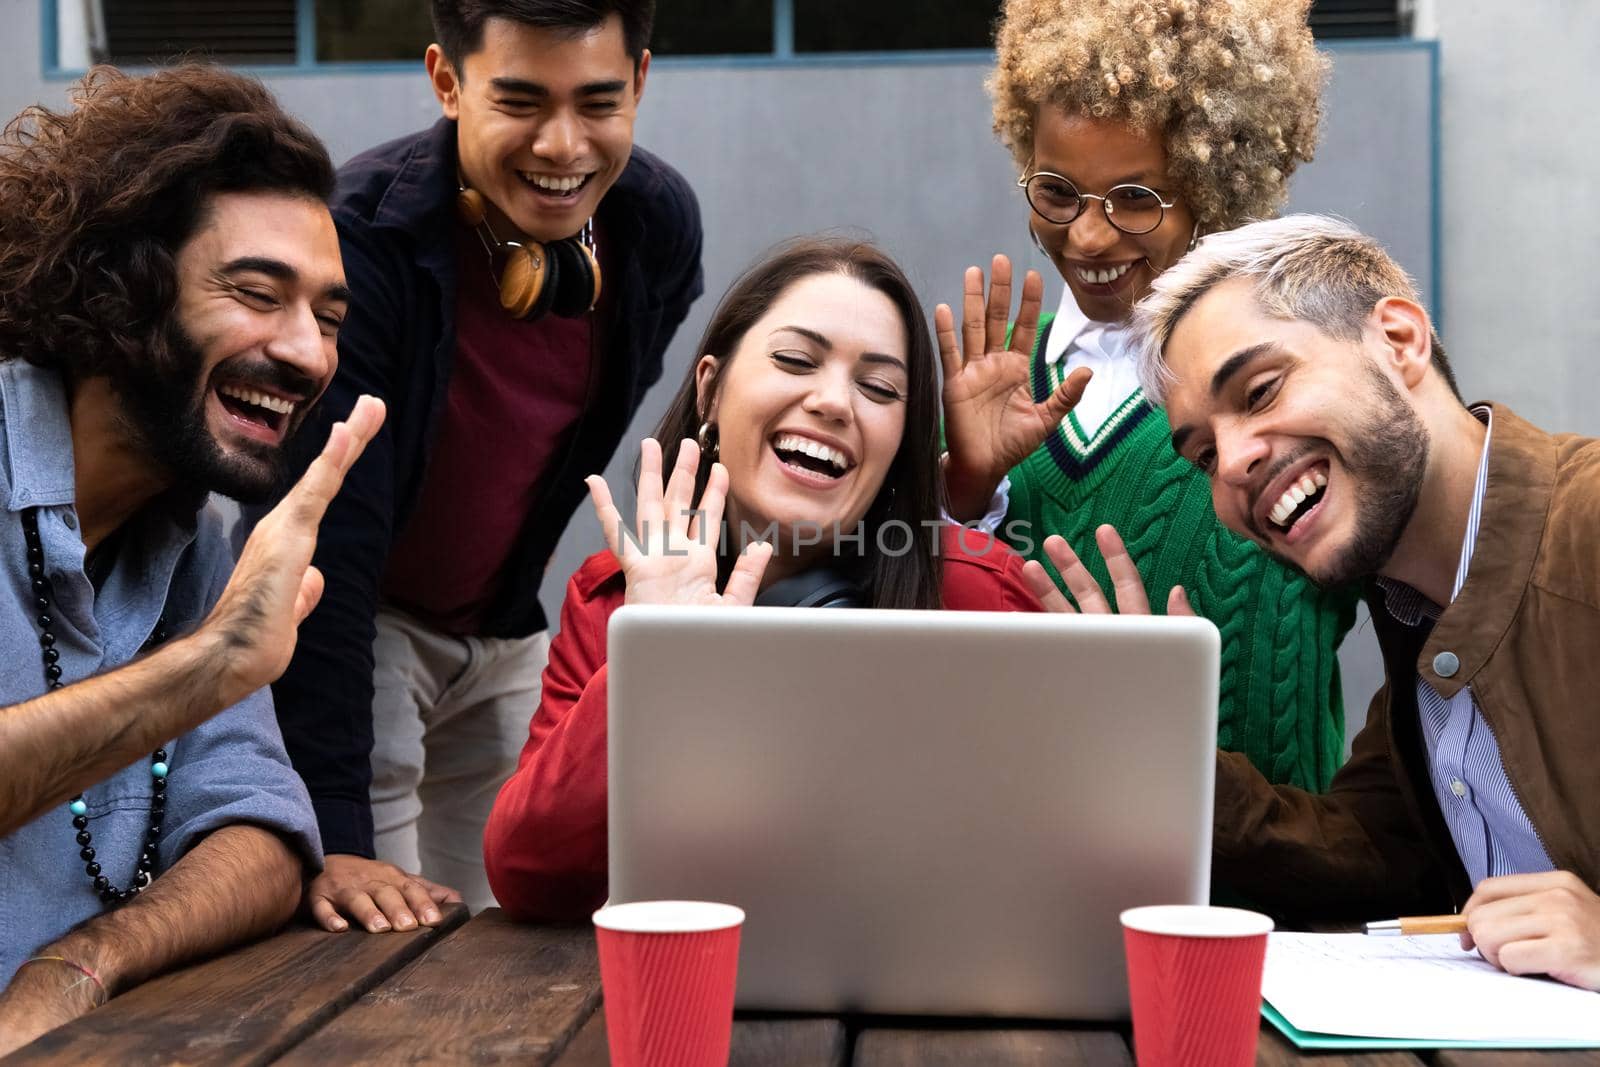 Smiling multiracial group of friends on a video call waving hand saying hello to friend. Friendship and technology concept.